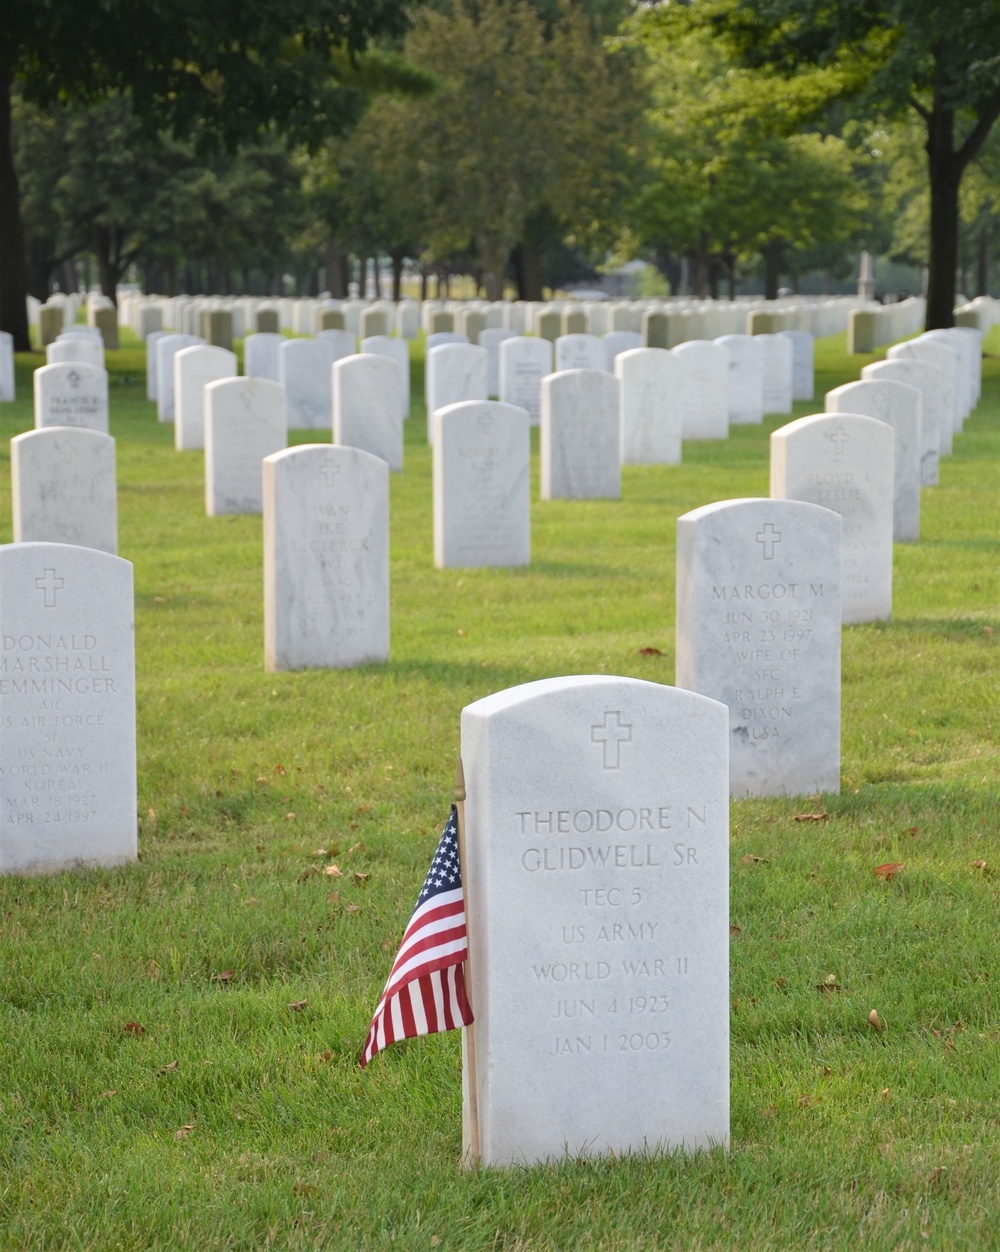 Arsenal cemetery to expand hallowed grounds, space for interments